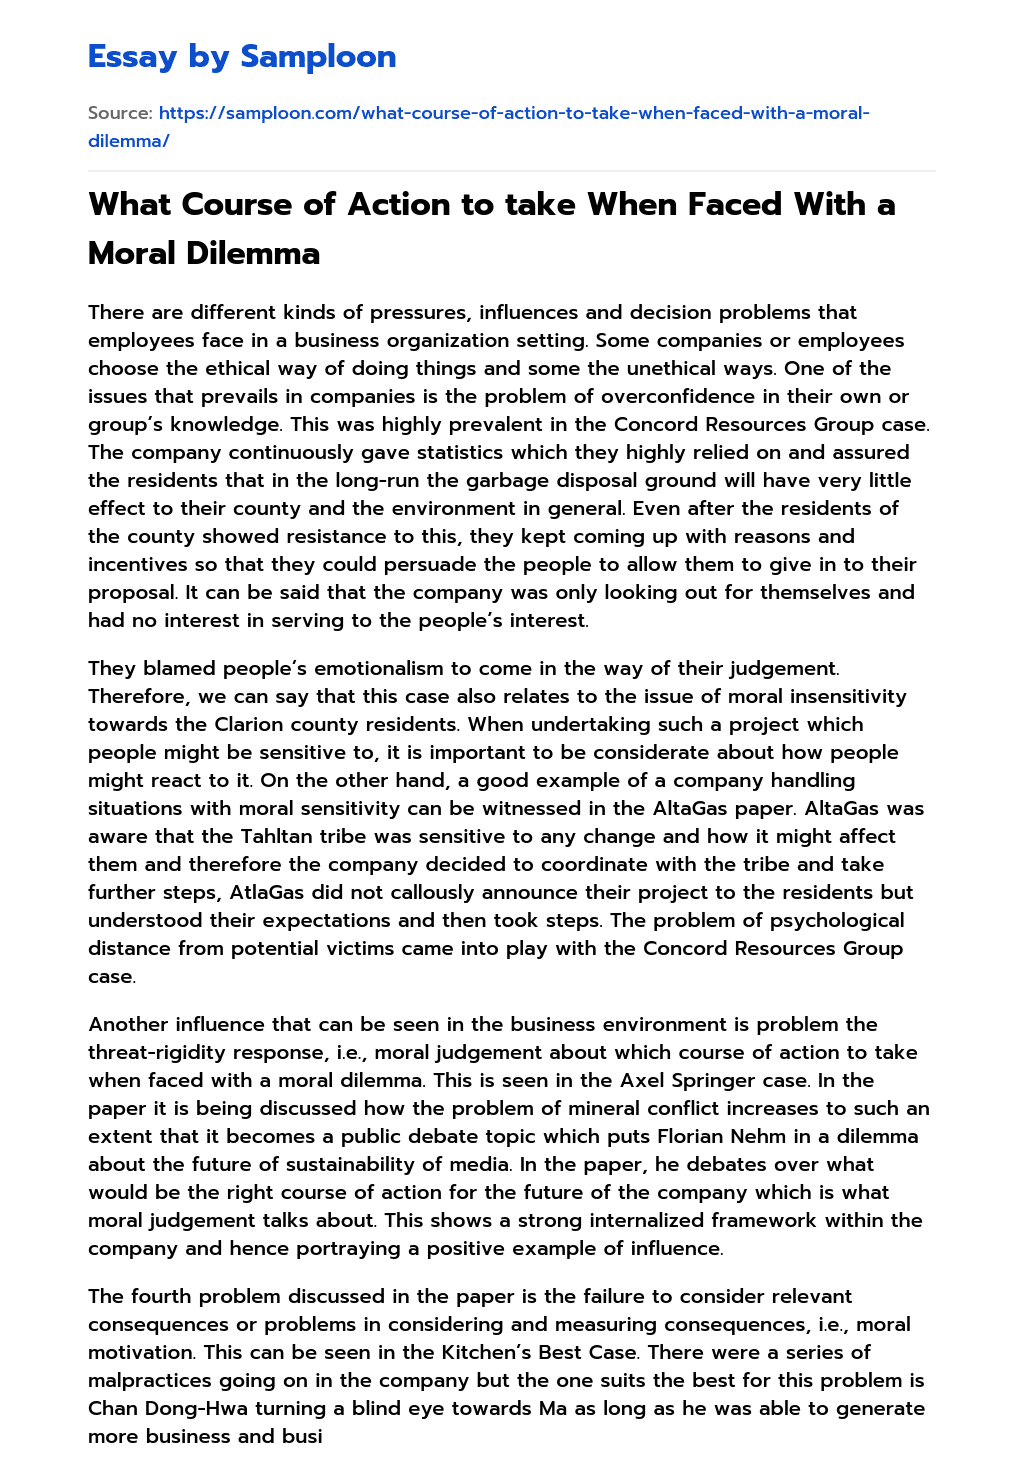 What Course of Action to take When Faced With a Moral Dilemma essay